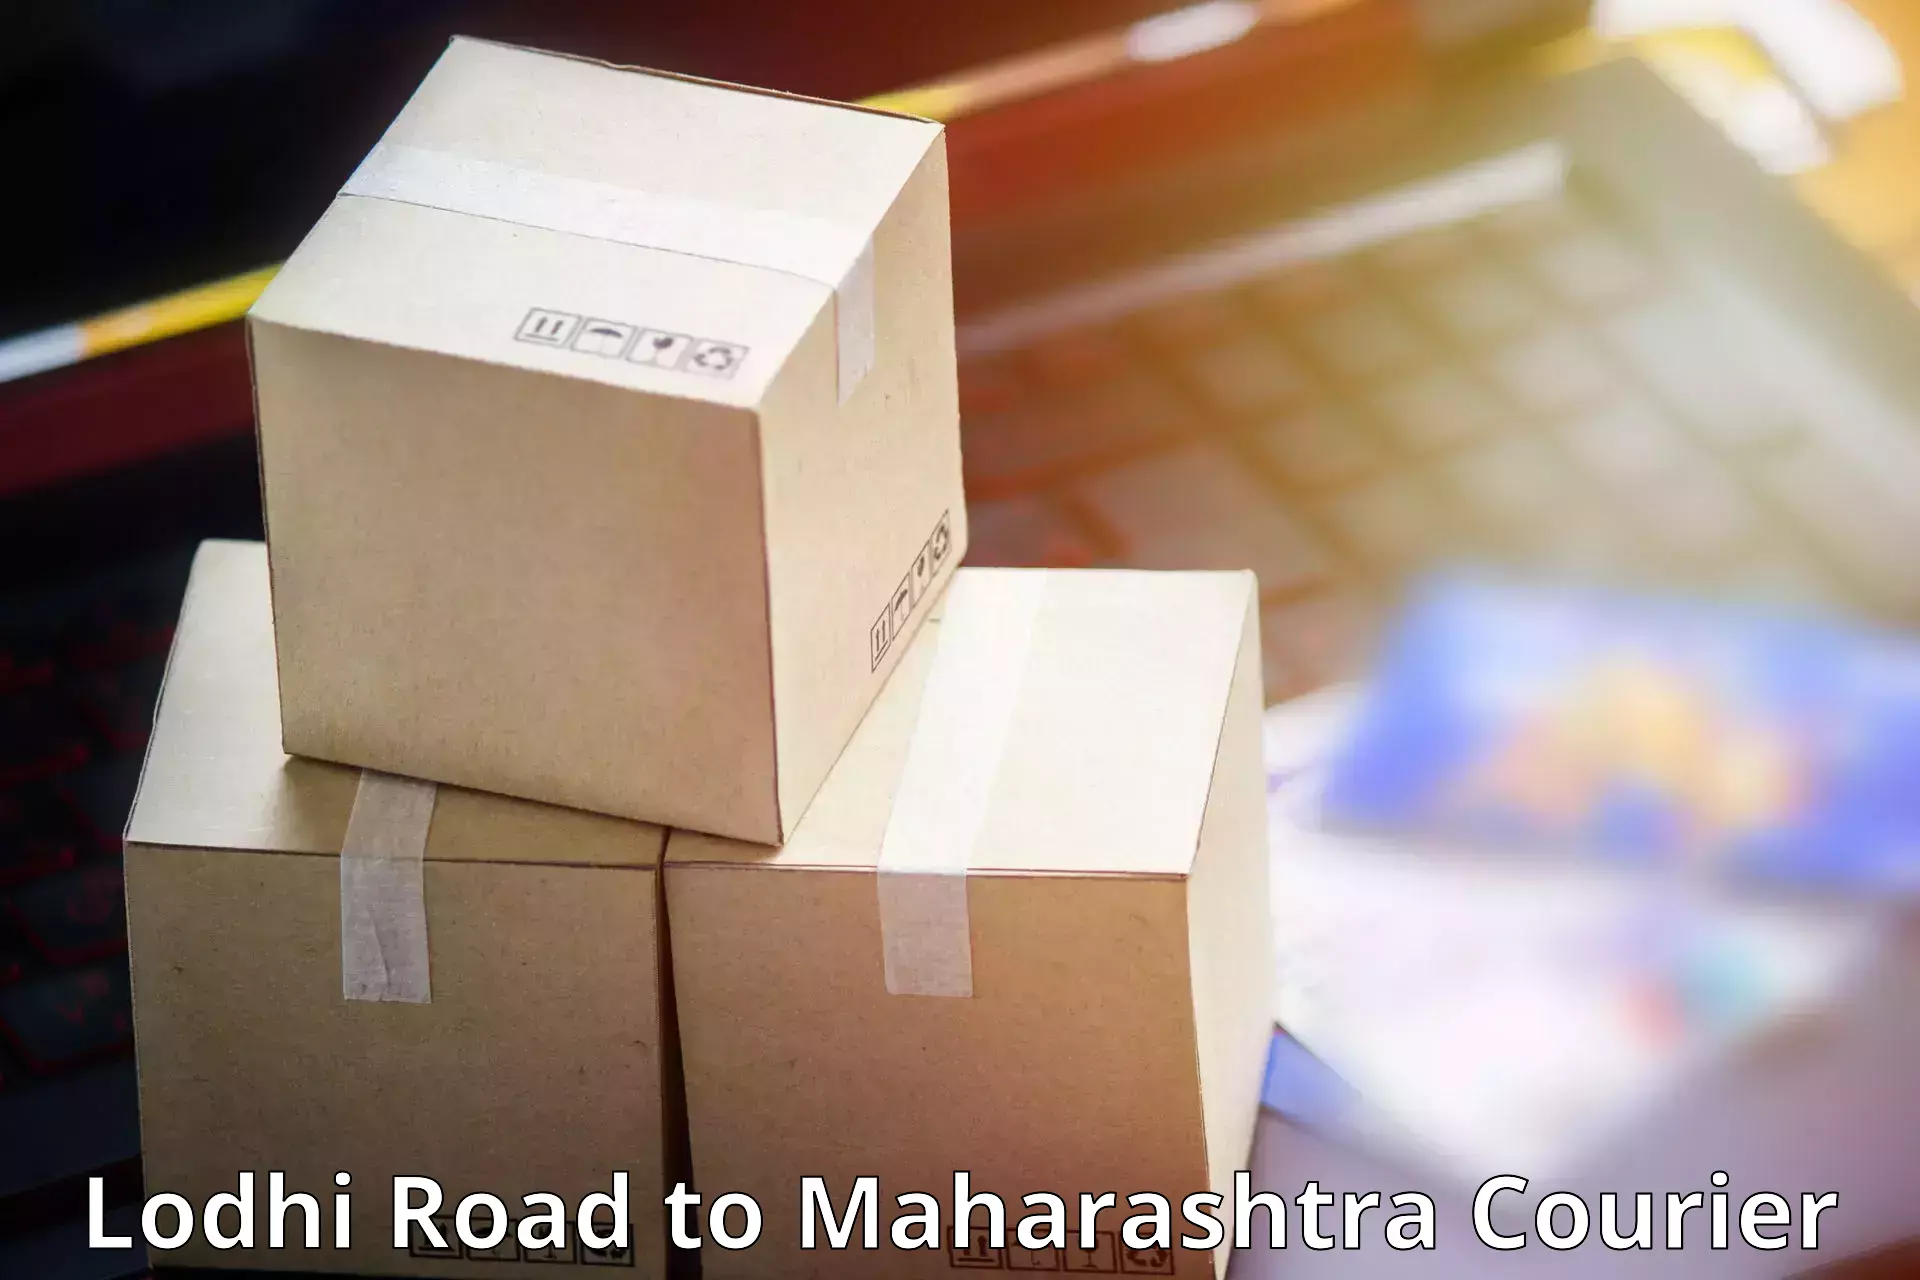 Professional parcel services Lodhi Road to Palghar